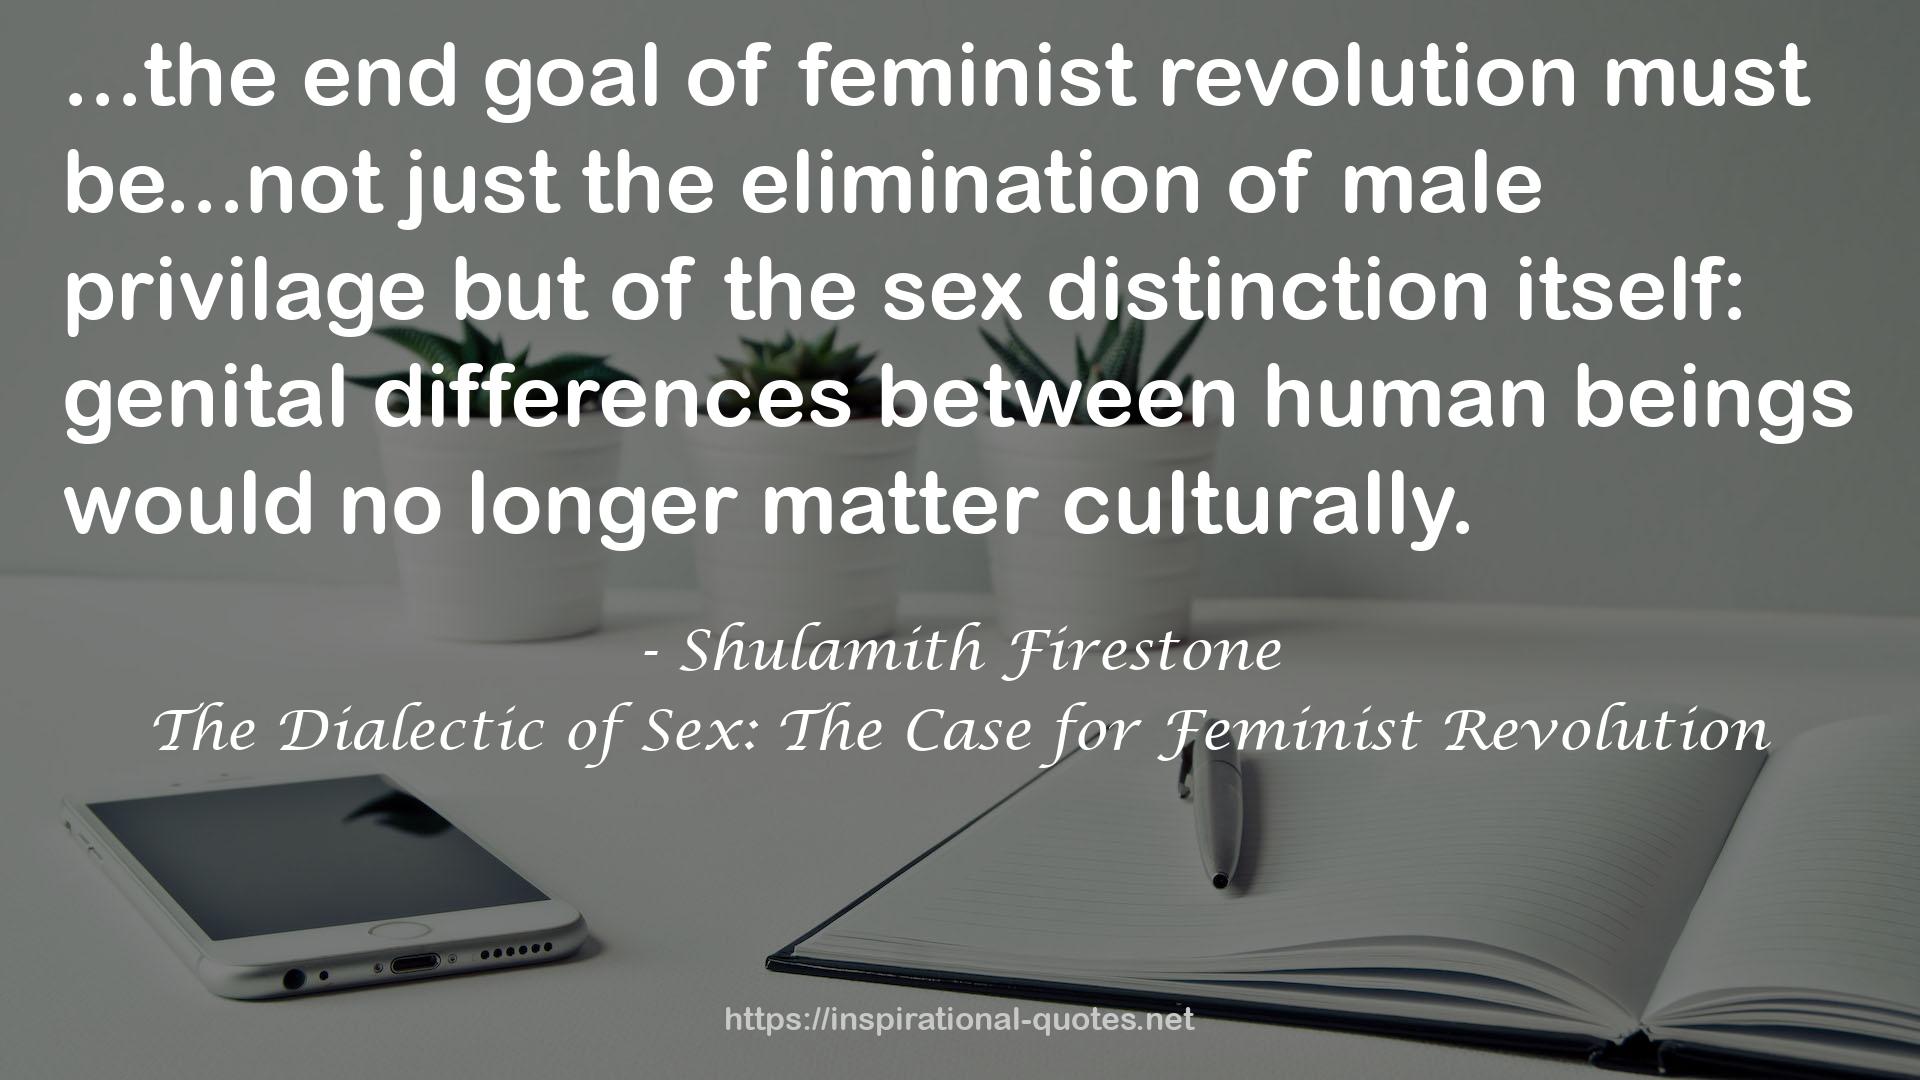 The Dialectic of Sex: The Case for Feminist Revolution QUOTES